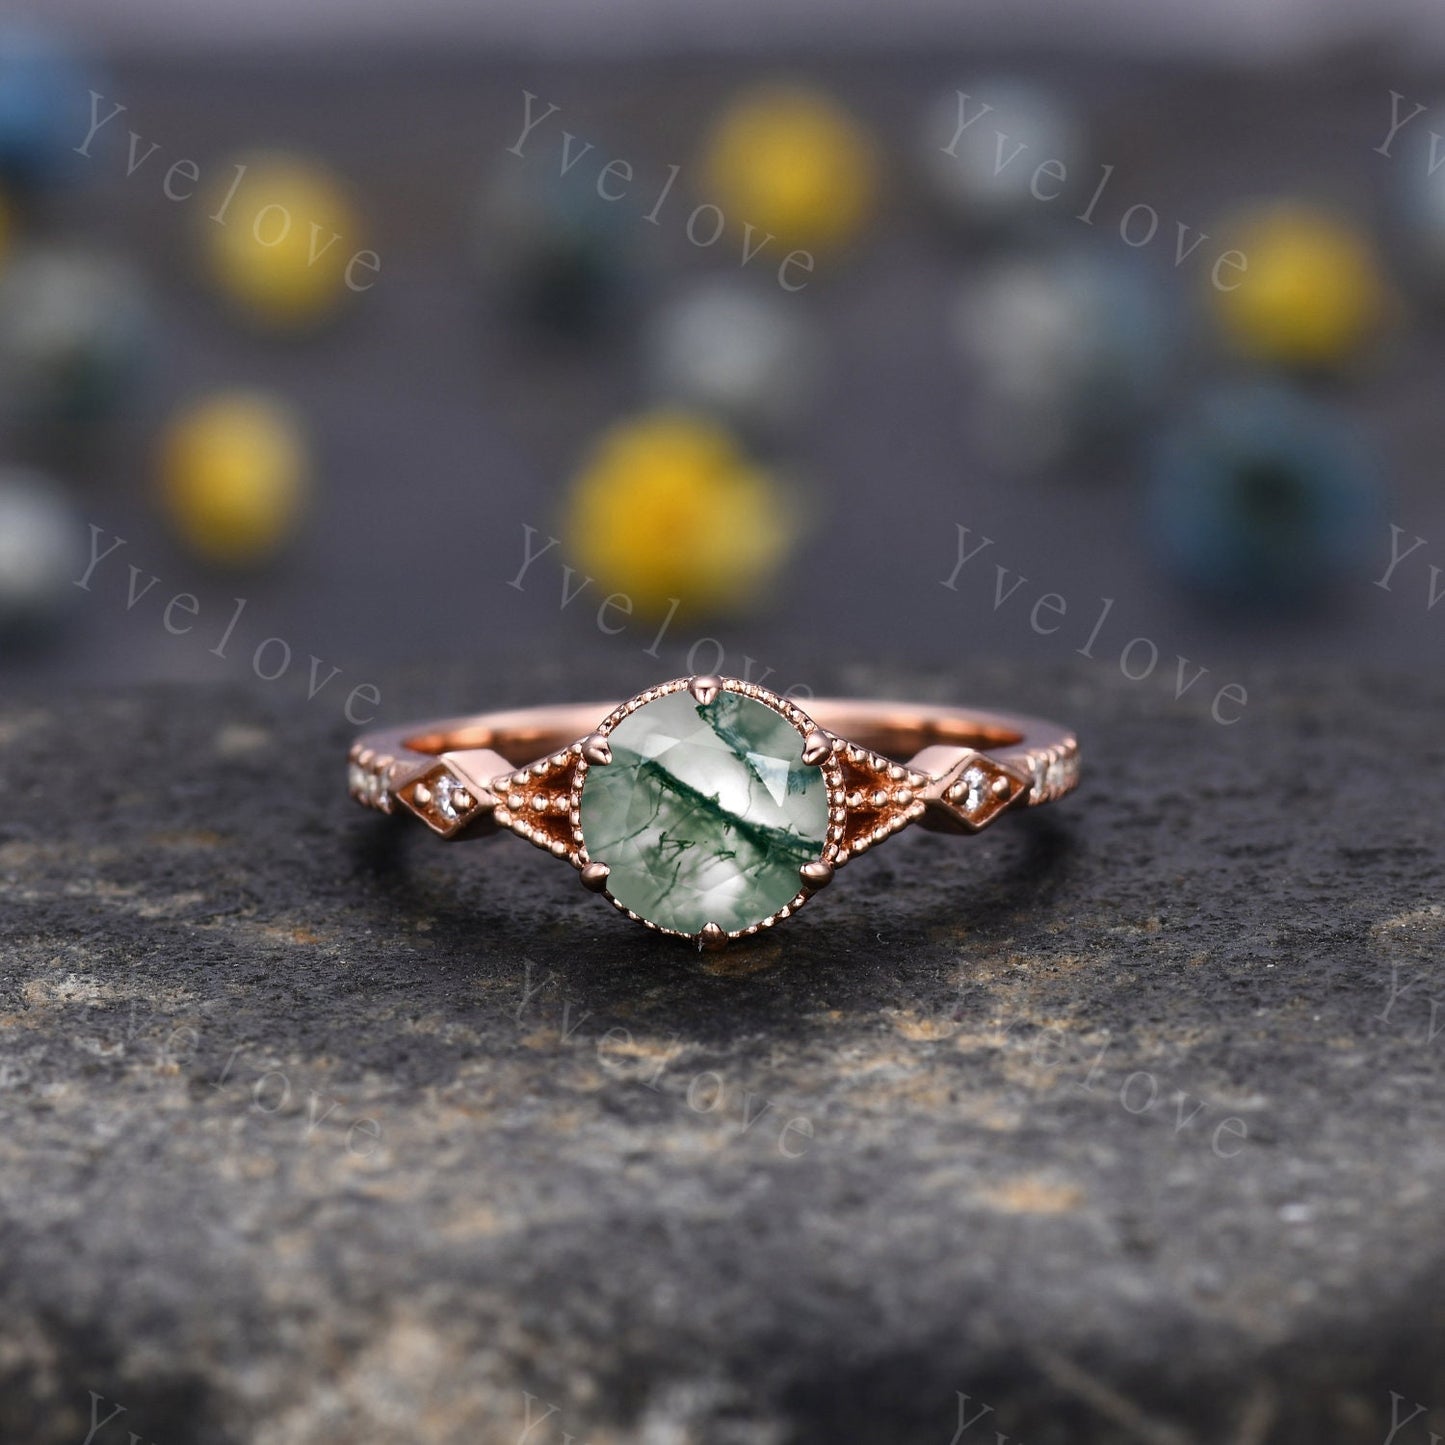 Vintage Round Moss Agate Engagement Ring,Nature Inspired,Dainty Green Gemstone Ring,Gold Ring,Unique Floral Design,Women Diamond Bridal Band